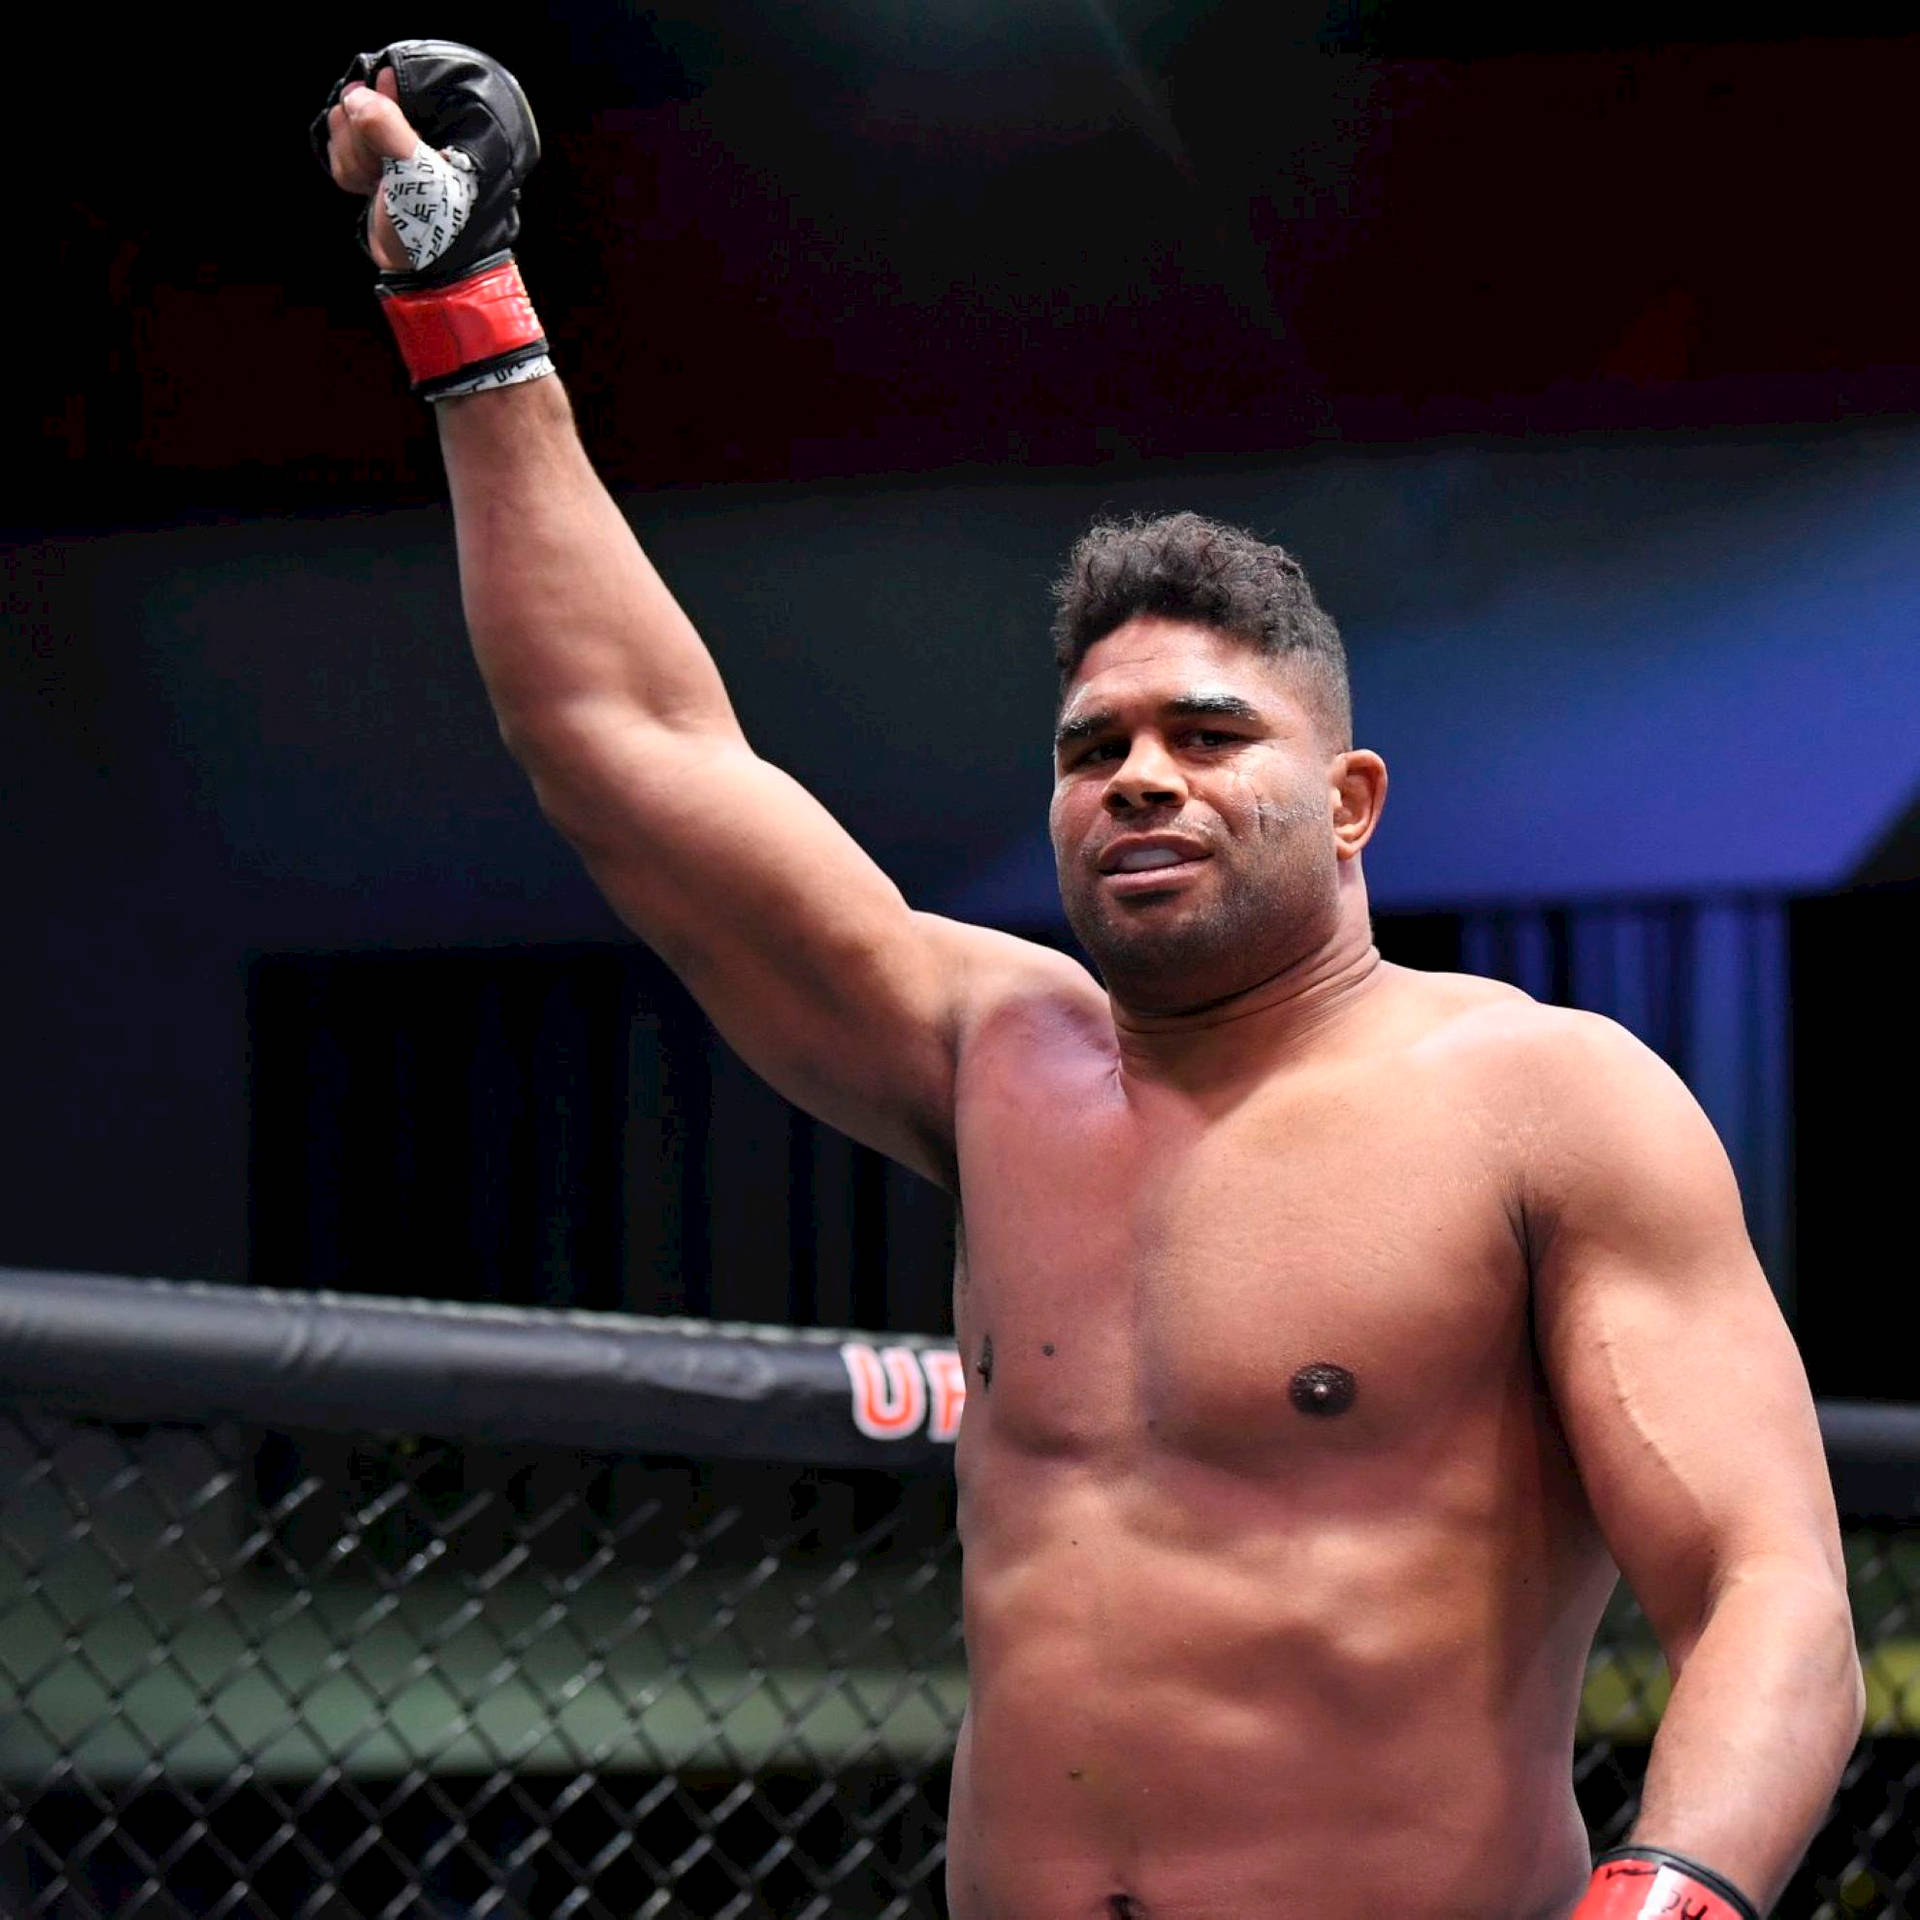 Alistair Overeem Celebrating Victory in the Ring Wallpaper